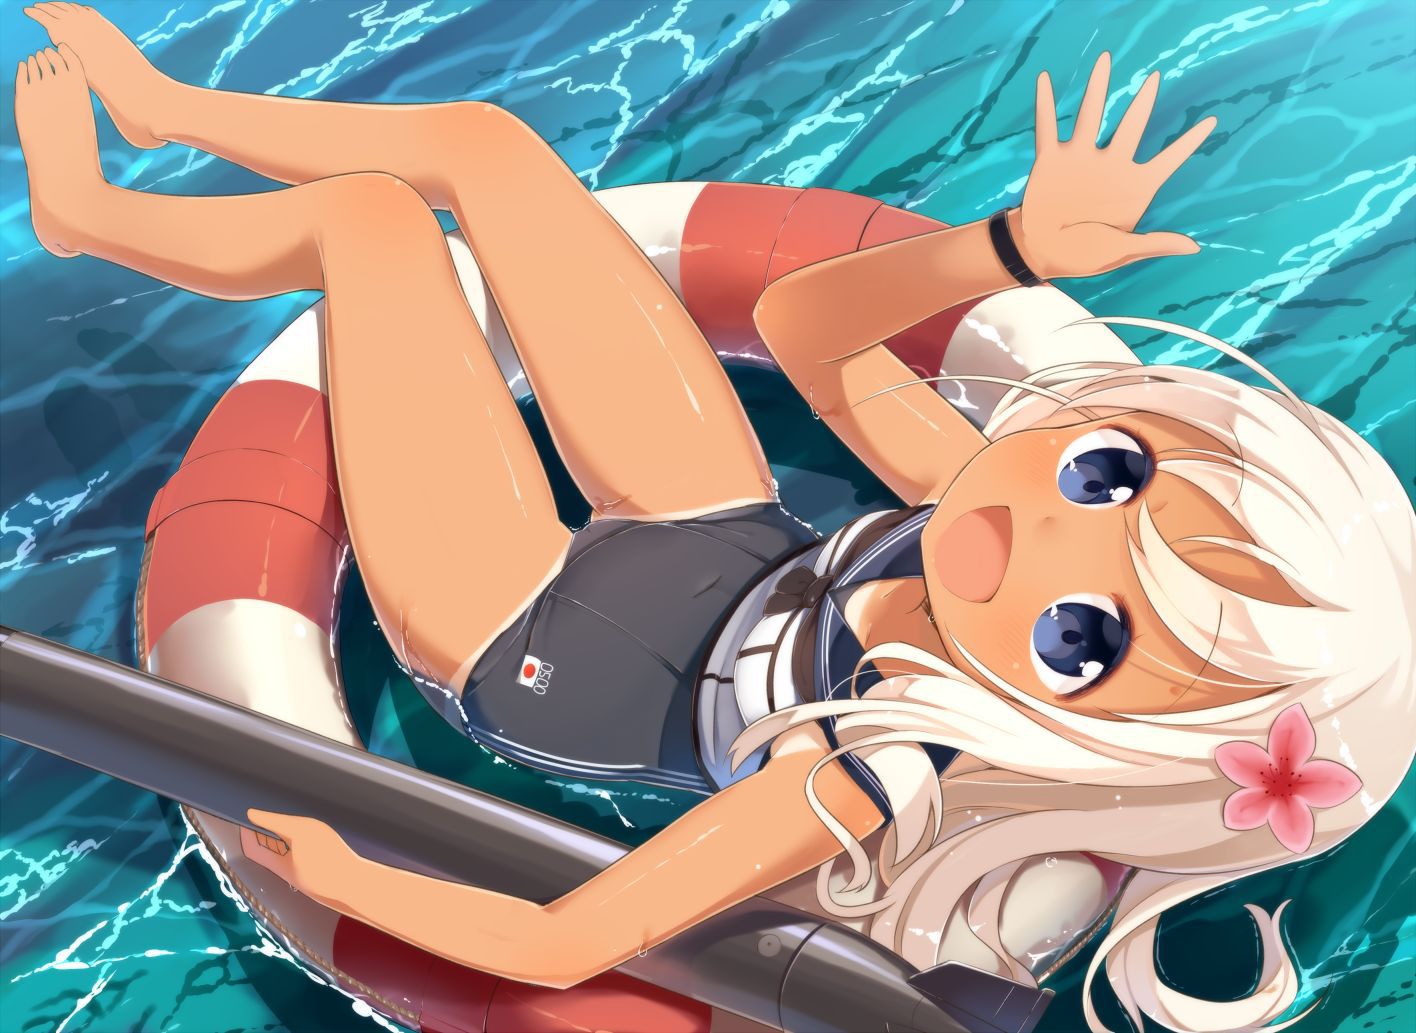 [the second] The SUQQU water sunburn daughter of warship this (fleet これくしょん), ロリエロ image summary of 呂 500, also known as the low No. 13 [20 pieces]! 3